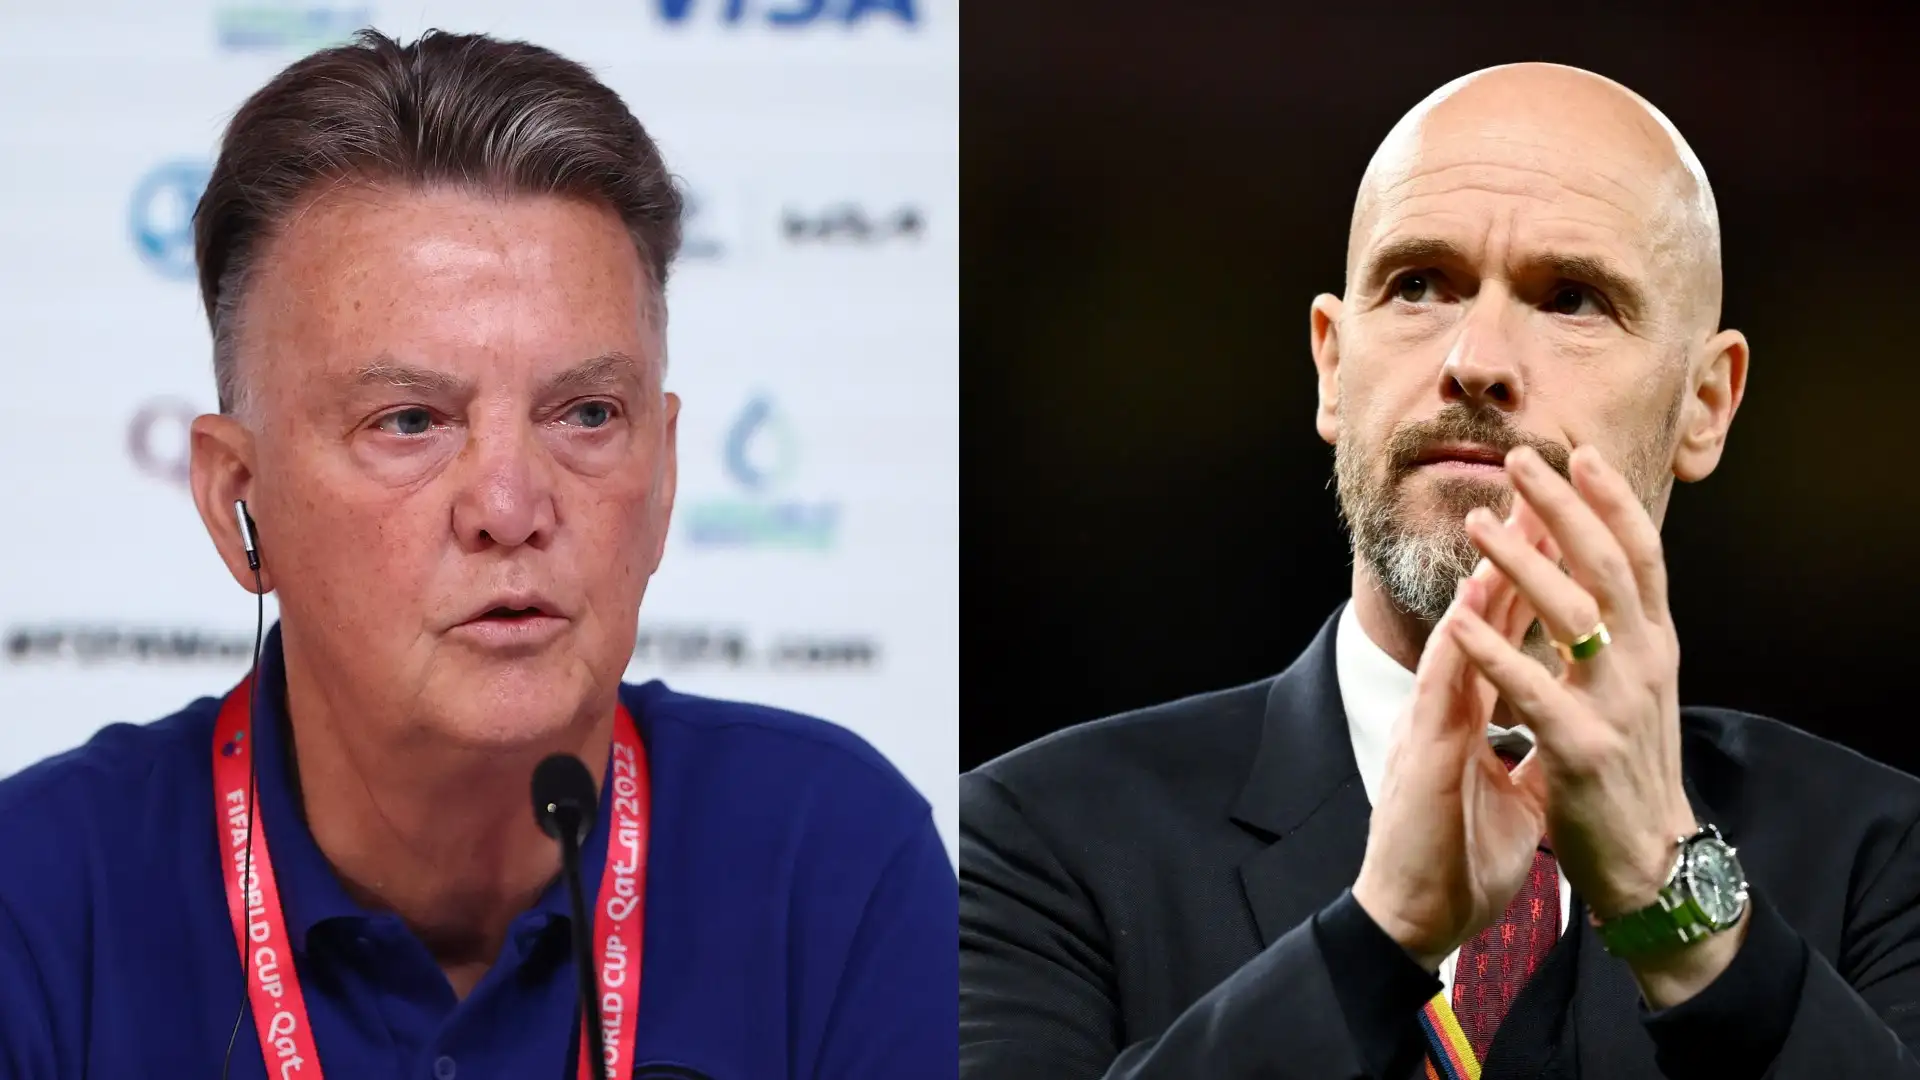 'He didn't do a good job' - Erik ten Hag criticised by Louis van Gaal but ex-Man Utd boss urges Red Devils to give Dutchman more time